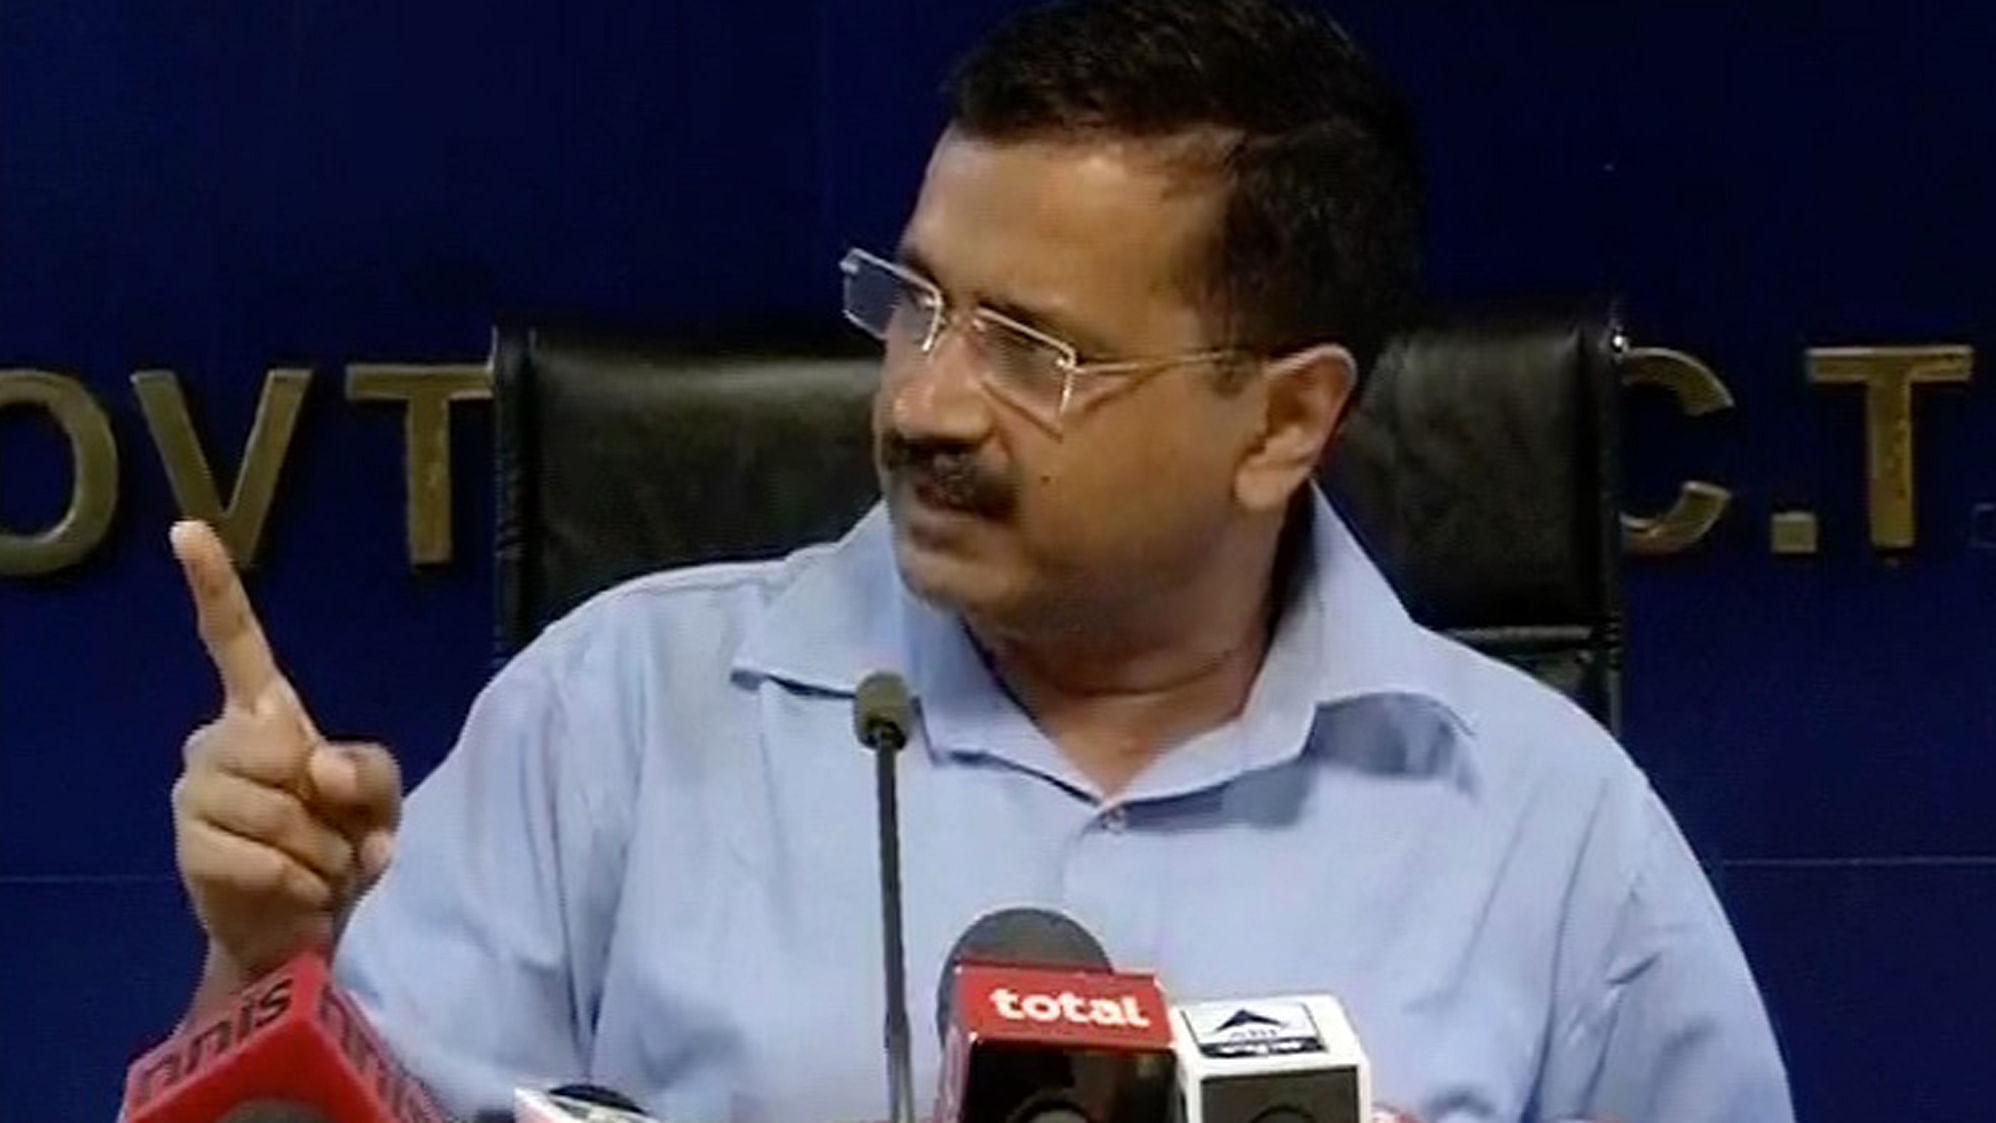 Delhi CM Arvind Kejriwal has ousted a minister from his cabinet. (Photo: ANI screengrab)